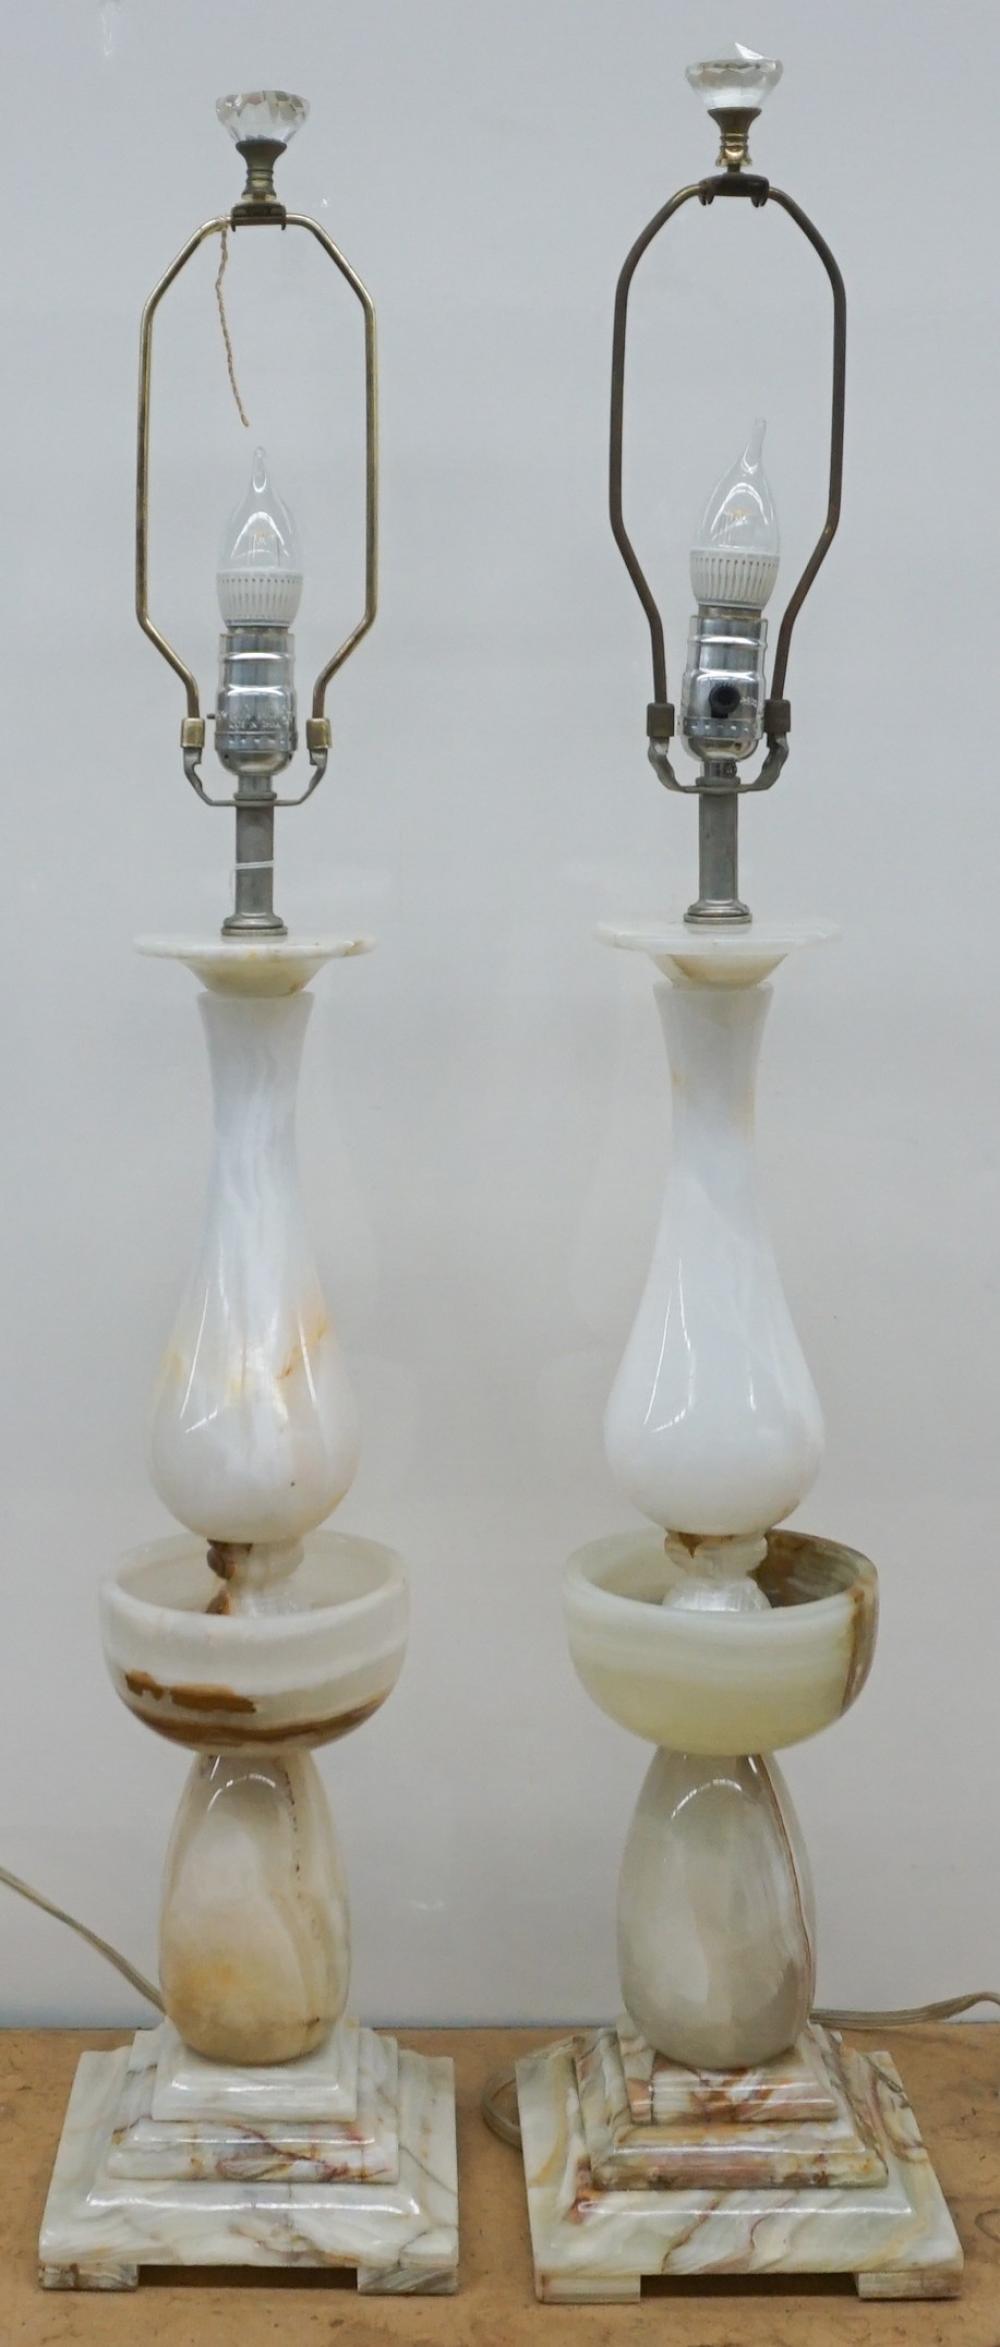 PAIR ONYX TABLE LAMPS, H: 35 IN.